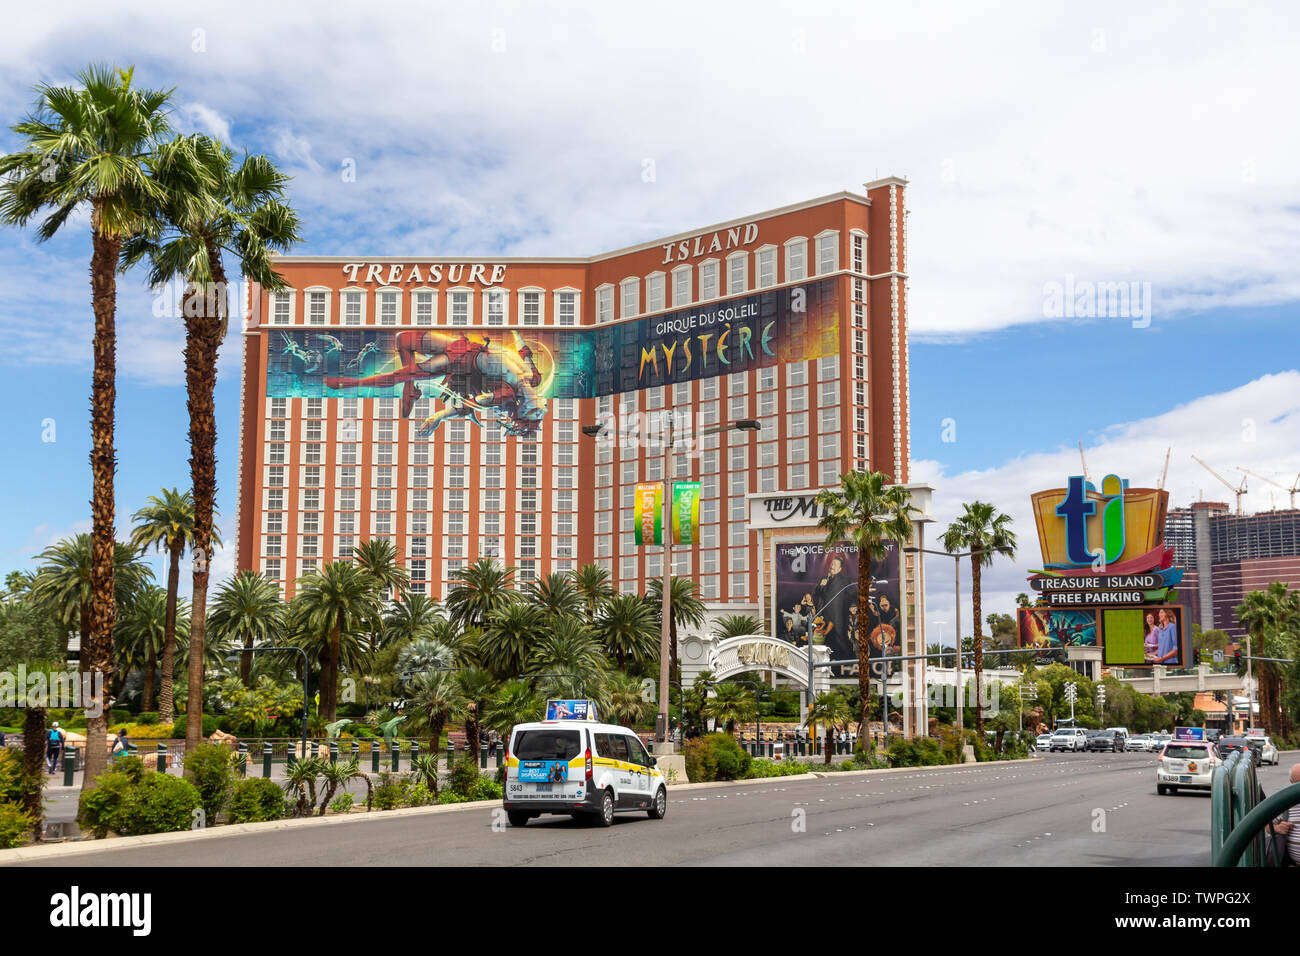 Las Vegas, Nevada, United States: May 20, 2019: Las Vegas Strip, casino and hotels city view at daytime from the street.Treasure Island hotel and casi Stock Photo